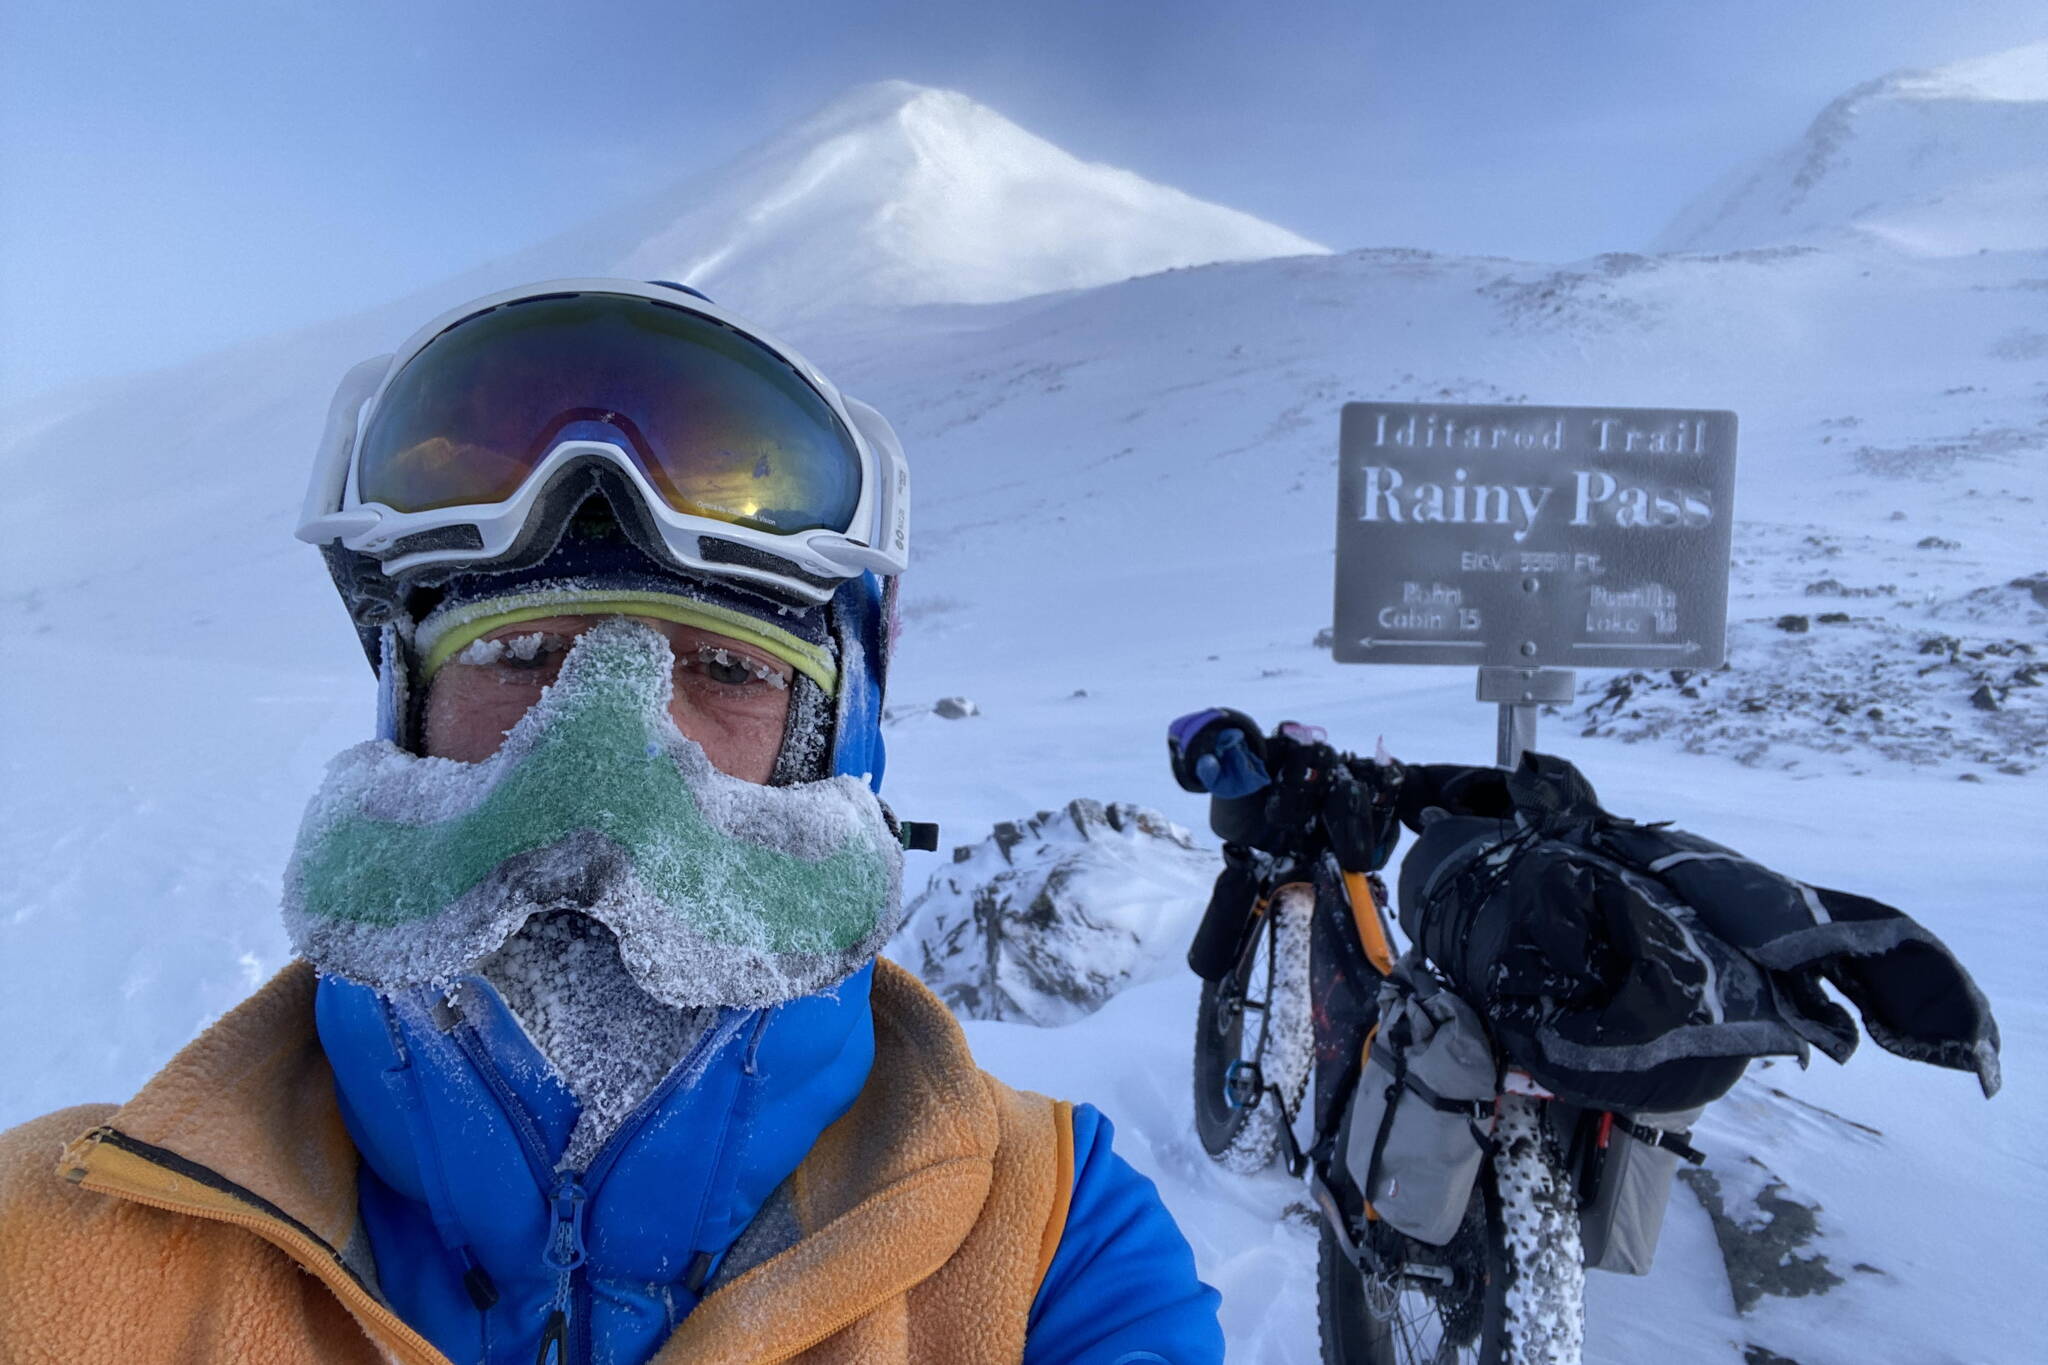 Peter Delamere poses in front of a sign in Rainy Pass in the Alaska Range during the 2024 Iditarod Trail Invitational race. On his face is a “nose-hat” invented by Fairbanks athlete Shalane Frost. (Photo by Peter Delamere)